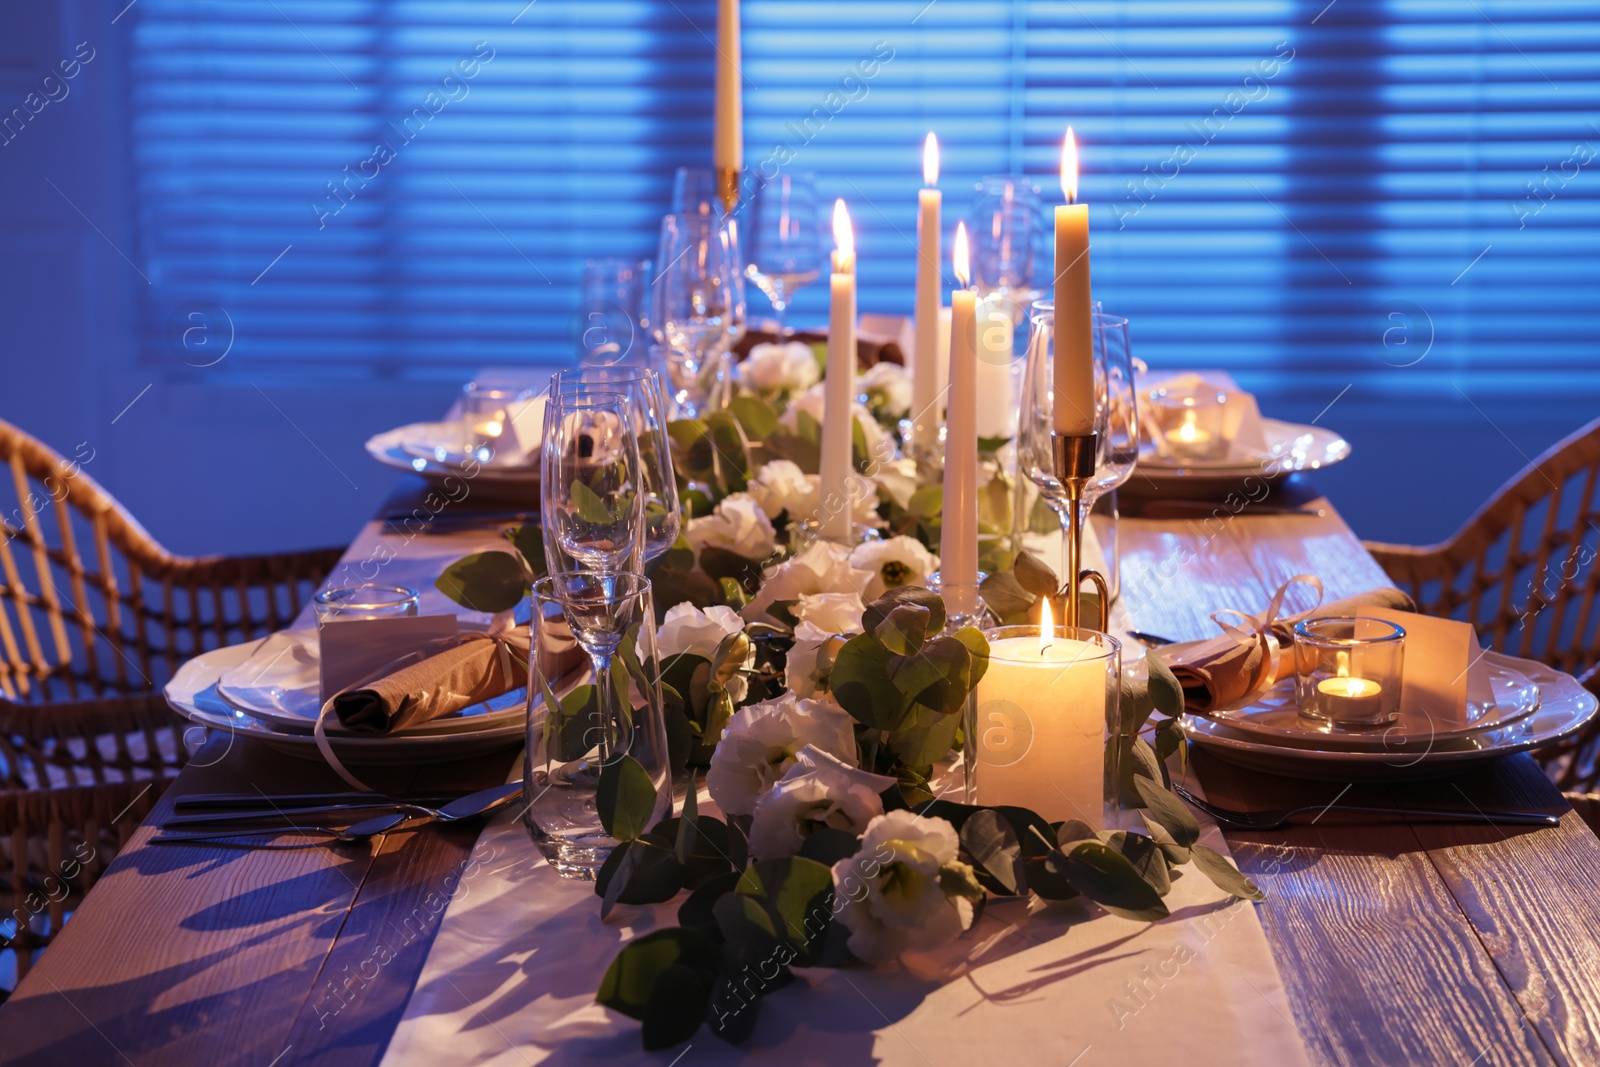 Photo of Festive table setting with beautiful tableware and decor indoors